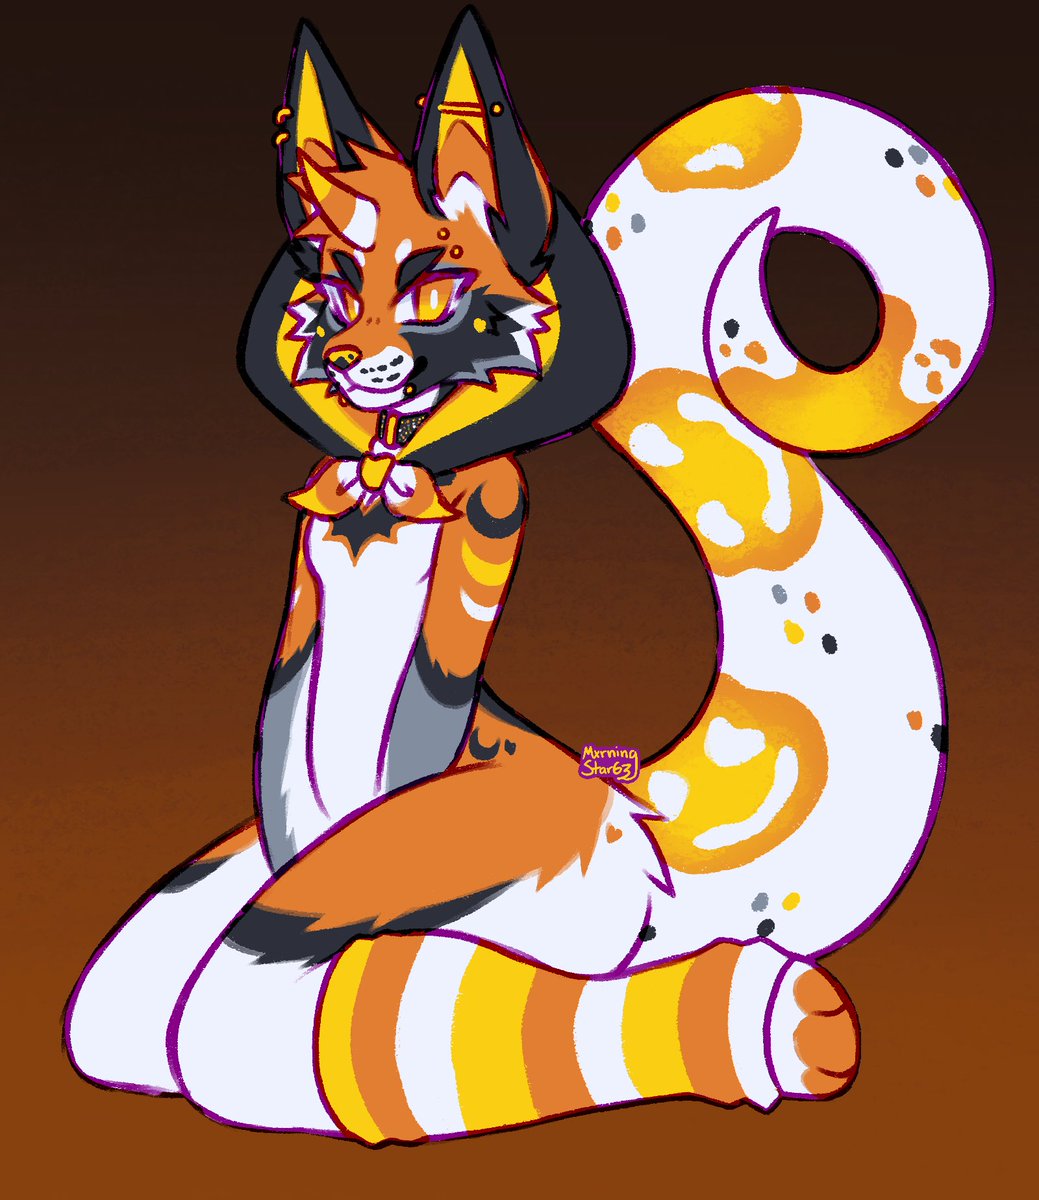 ✨🎃Crossfox CandyCorn Sneks🎃✨
~ PayPal/USD Offers only! ~

Starting bid: $3️⃣5️⃣ - Buyout: $1️⃣0️⃣0️⃣
*Back-outs will be blacklisted.

Any likes, 🔁’s and 💬’s are free to help a single disabled dad help his family. Many miigwetch’s for anything and have a Happy Halloween! 🎃🧡✨